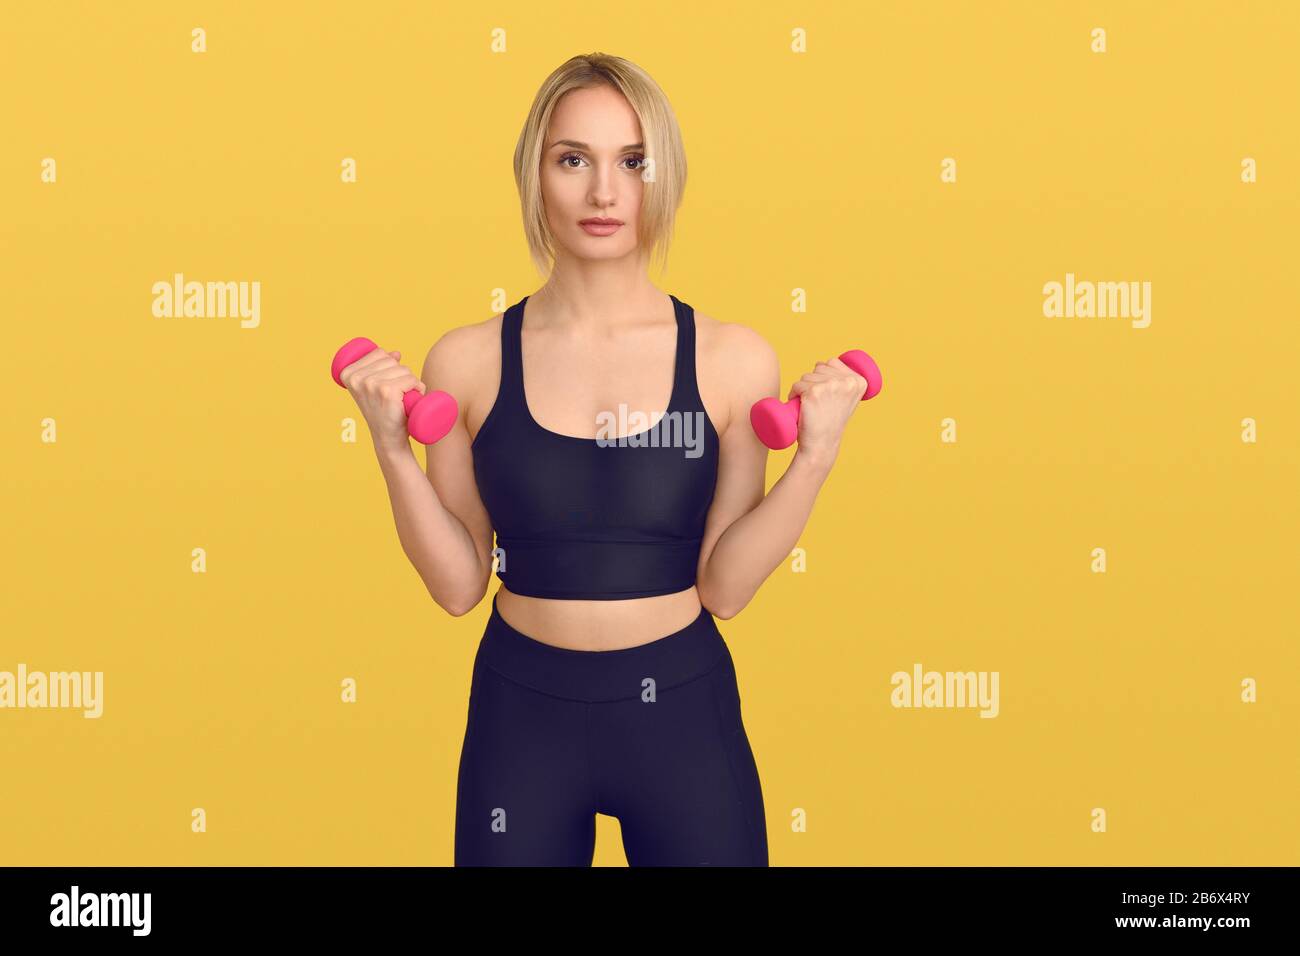 Pretty blond woman in black training top with small pink dumbbells in her hands, looking at camera. Close-up front portrait against plain yellow backg Stock Photo